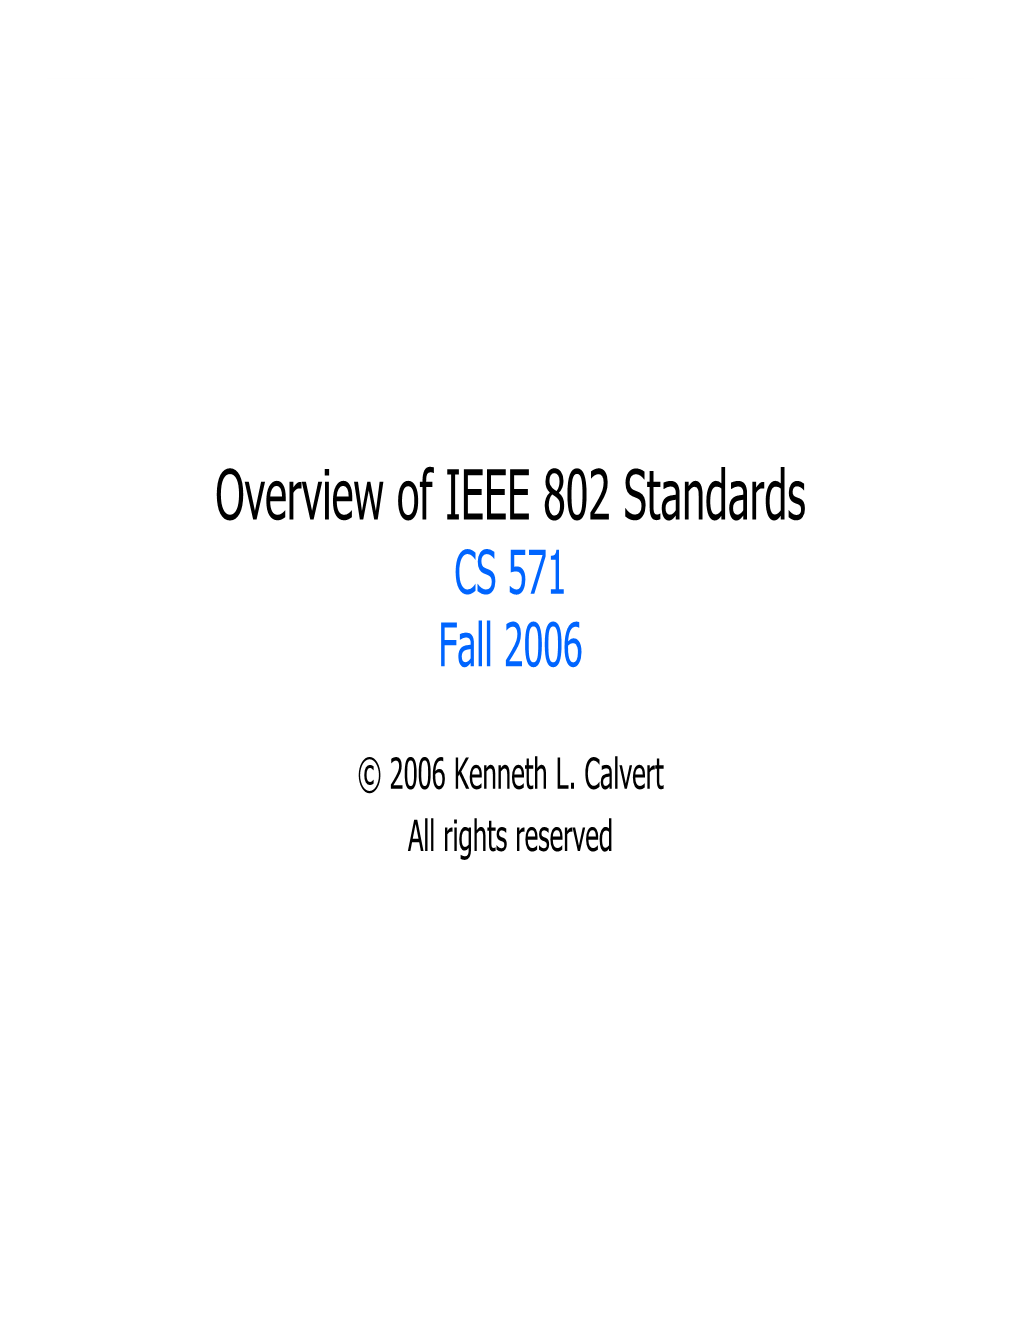 Overview of IEEE 802 Standards CS 571 Fall 2006